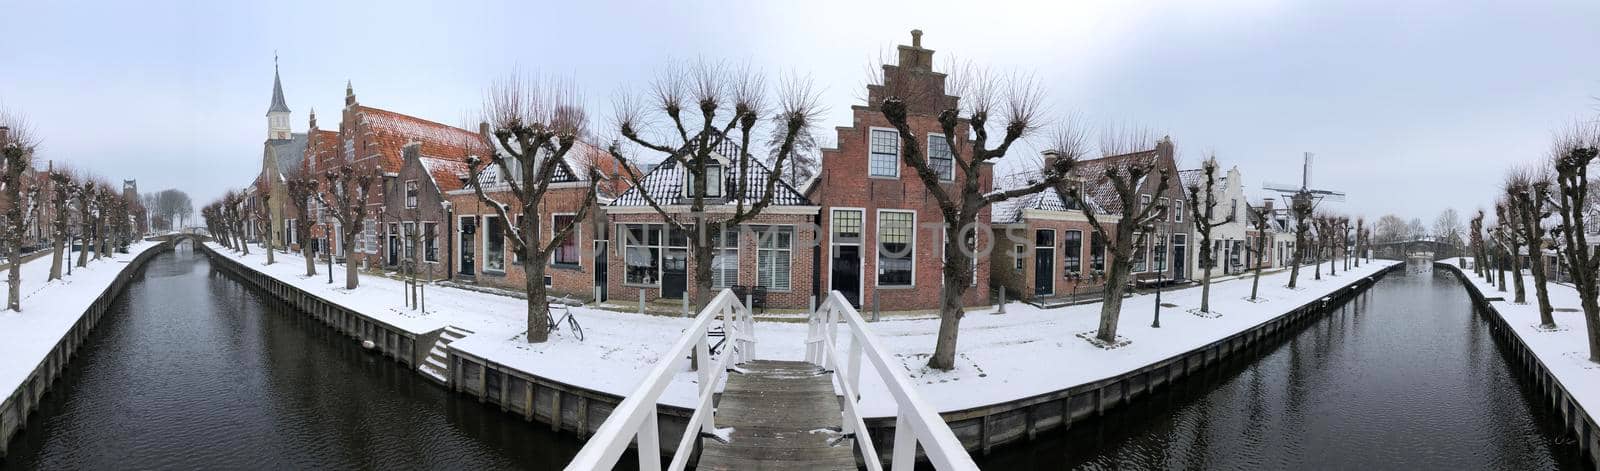 Panorama from the canal in Sloten during winter